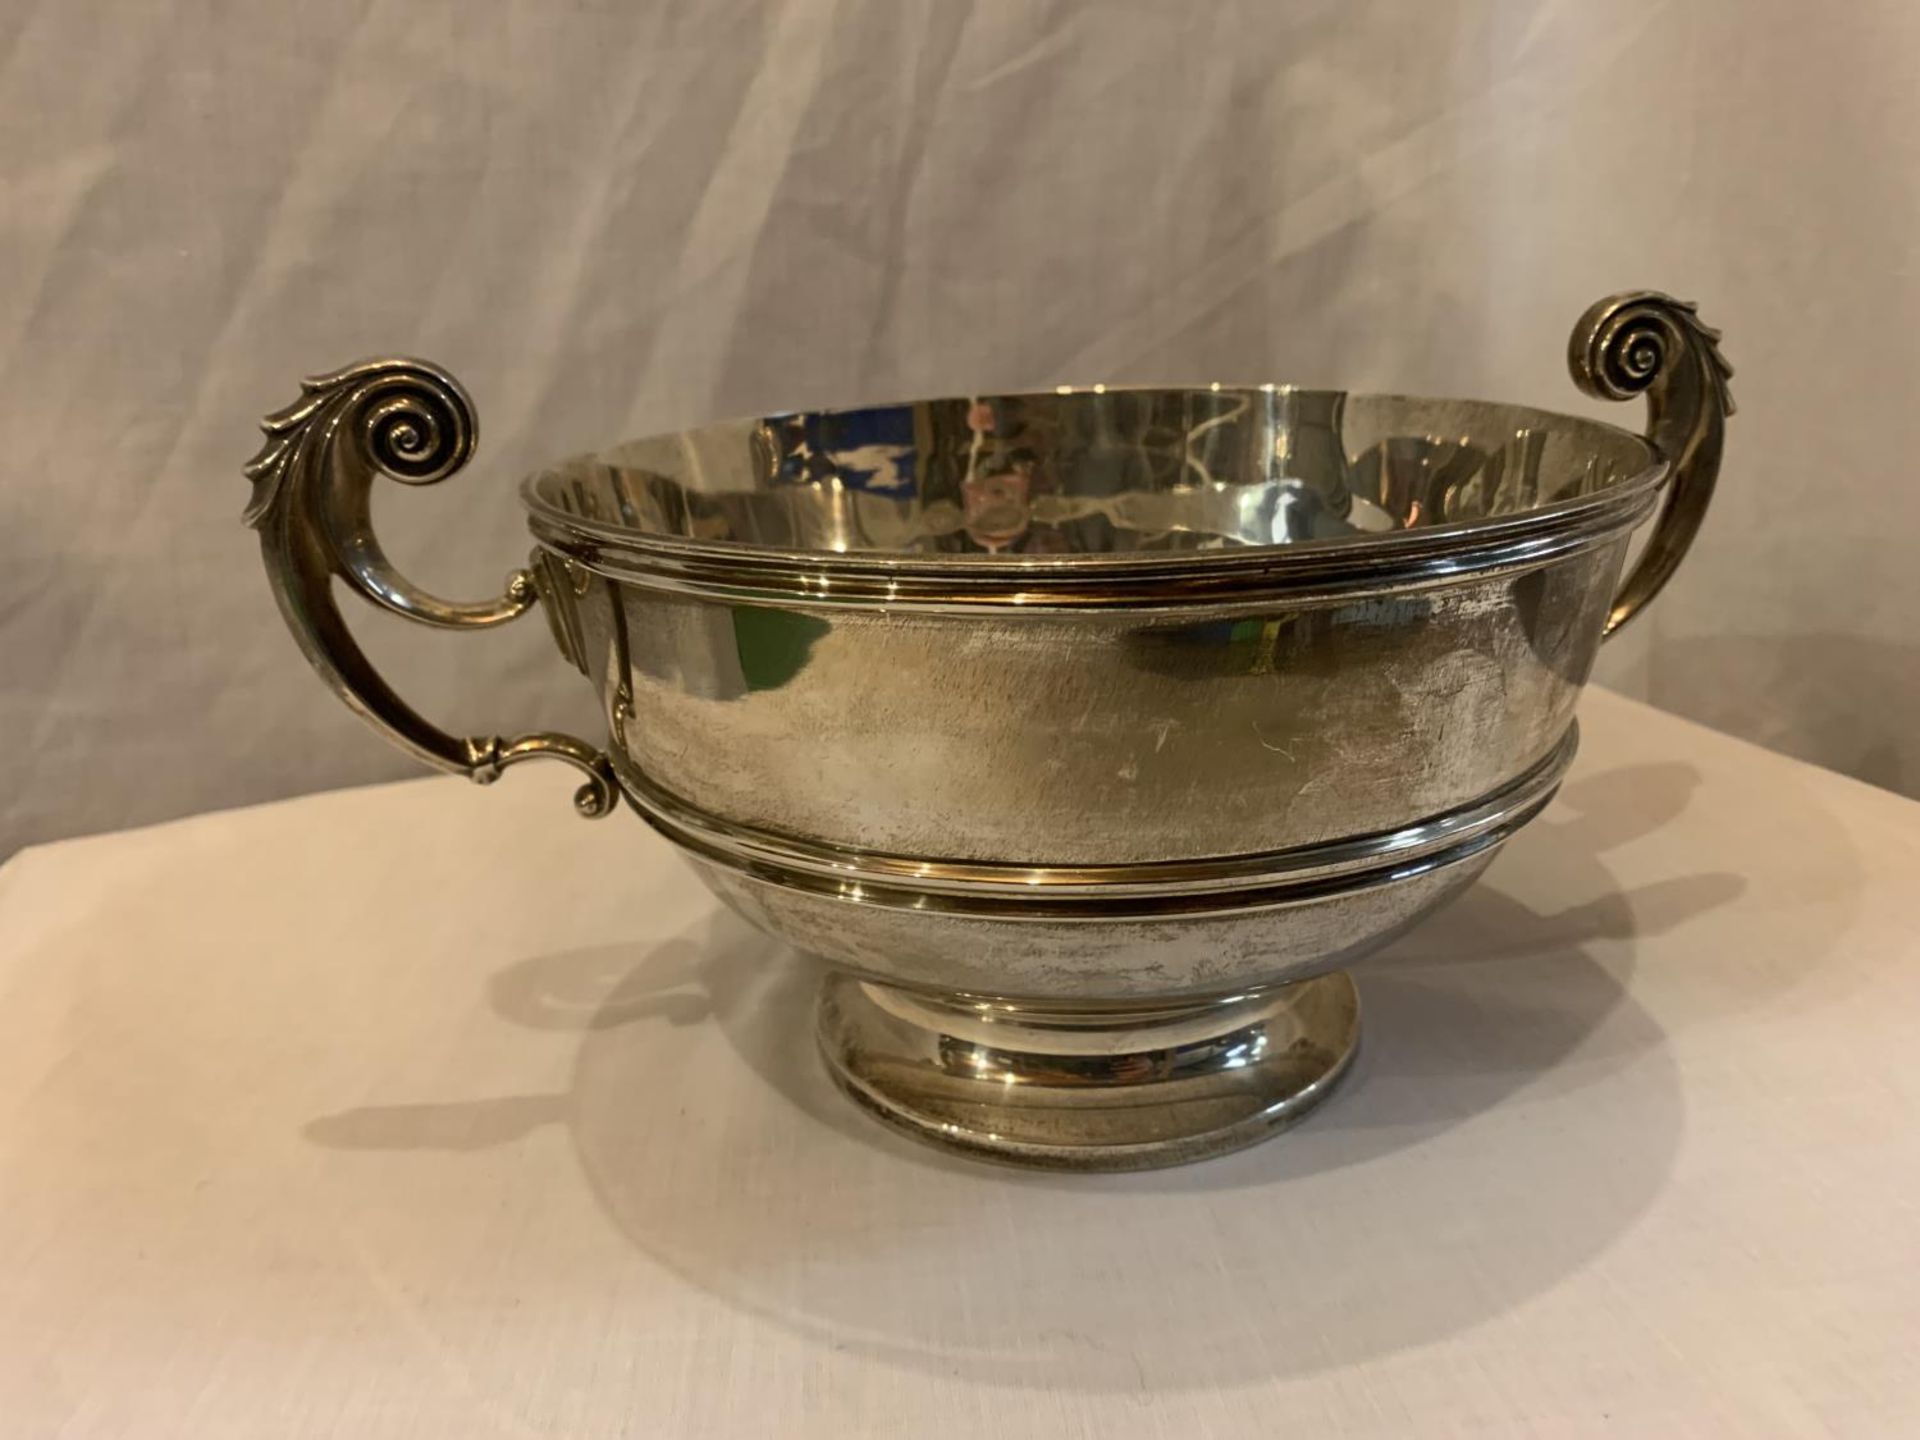 A HALLMARKED LONDON SILVER TWIN HANDLED BOWL GROSS WEIGHT 974 GRAMS - Image 3 of 5